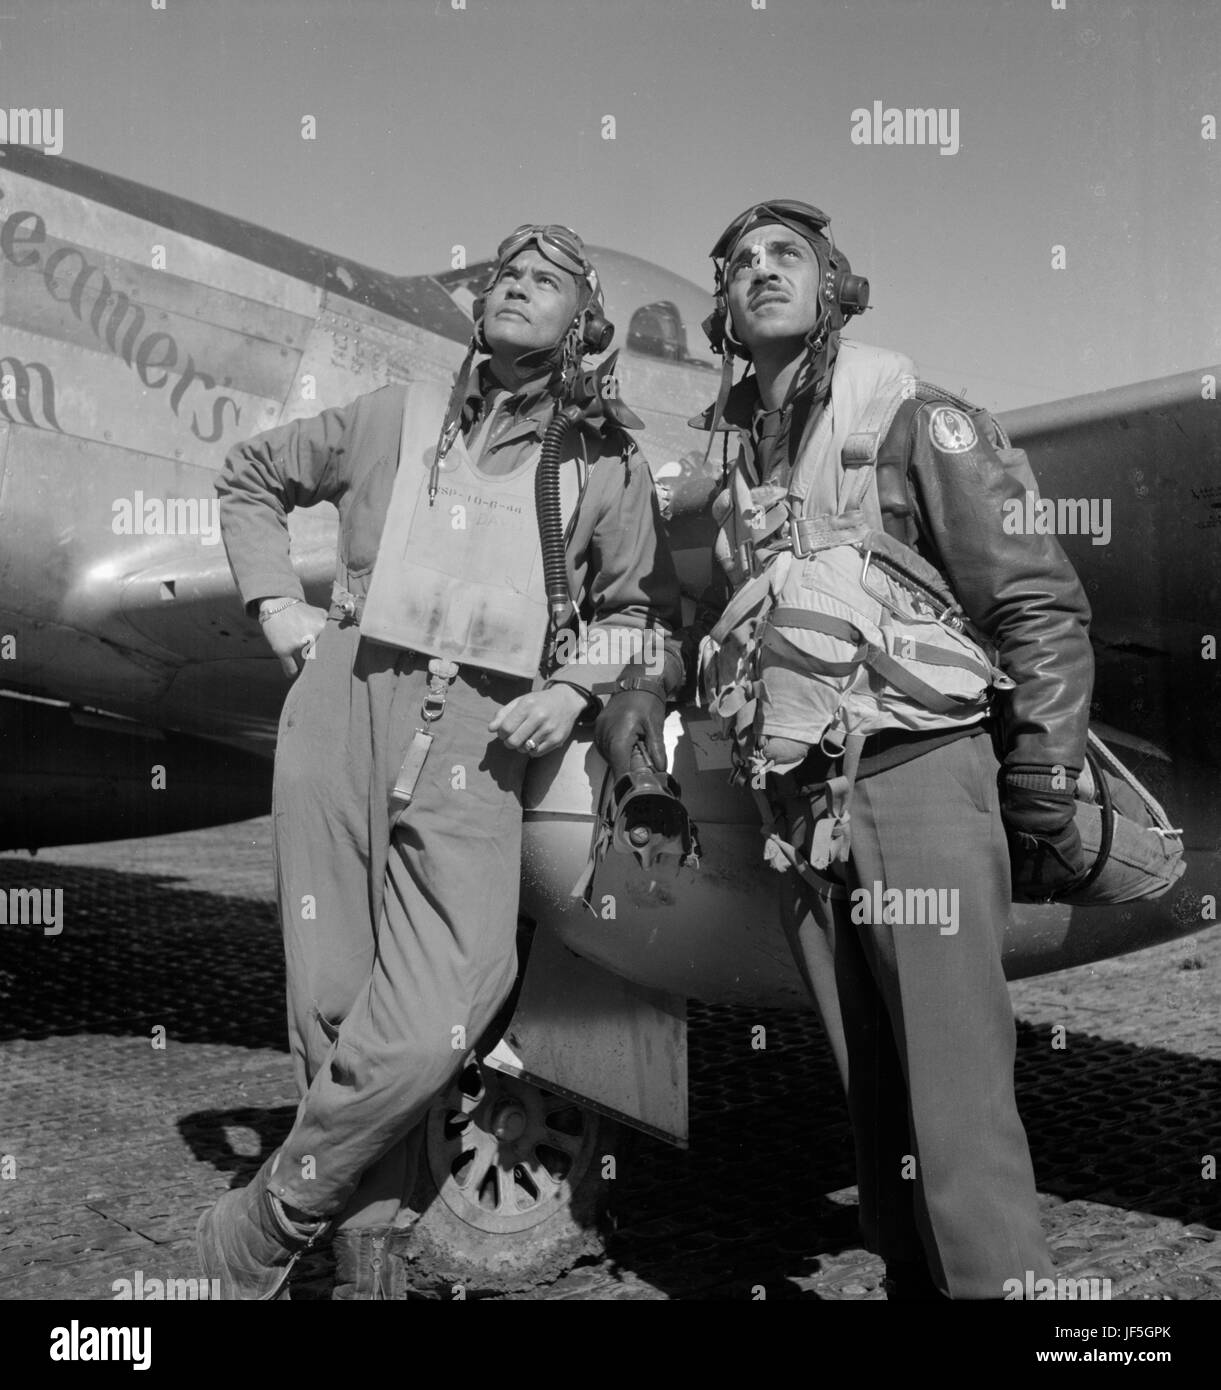 The Tuskegee Airmen is the popular name of a group of African-American military pilots who fought in World War II. Officially, they formed the 332nd Fighter Group and the 477th Bombardment Group of the United States Army Air Forces. All black military pilots who trained in the United States trained at Moton Field, the Tuskegee Army Air Field, and were educated at Tuskegee University, located near Tuskegee, Alabama. Stock Photo